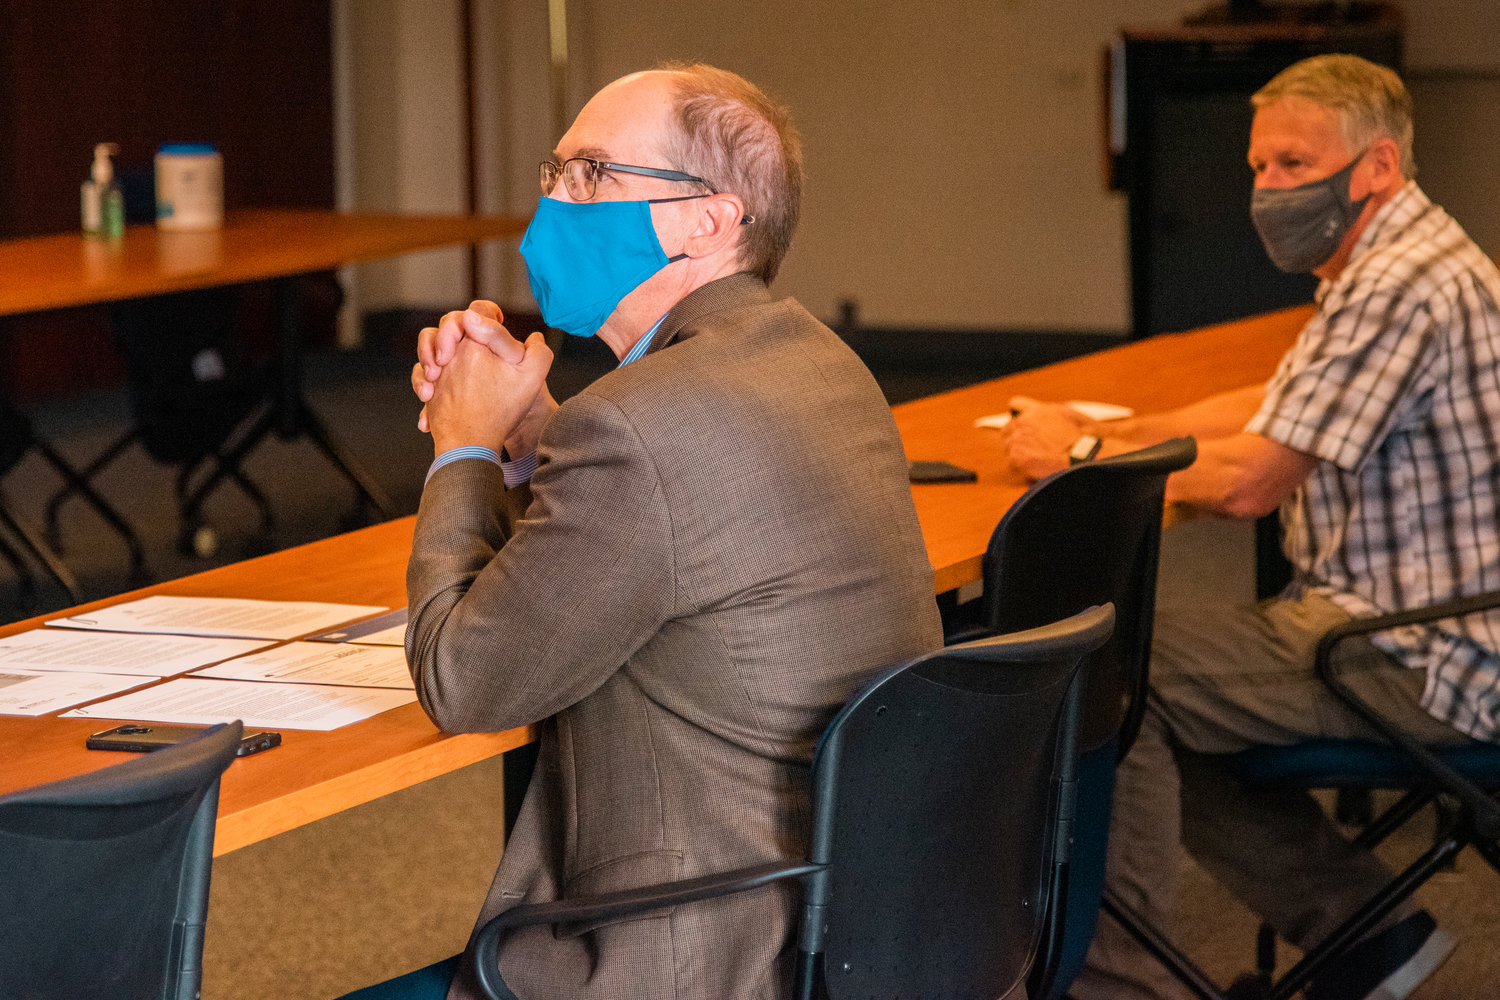 Board members sport masks Thursday in the Hanson Administration Building at Centralia College during a Board of Trustees meeting.